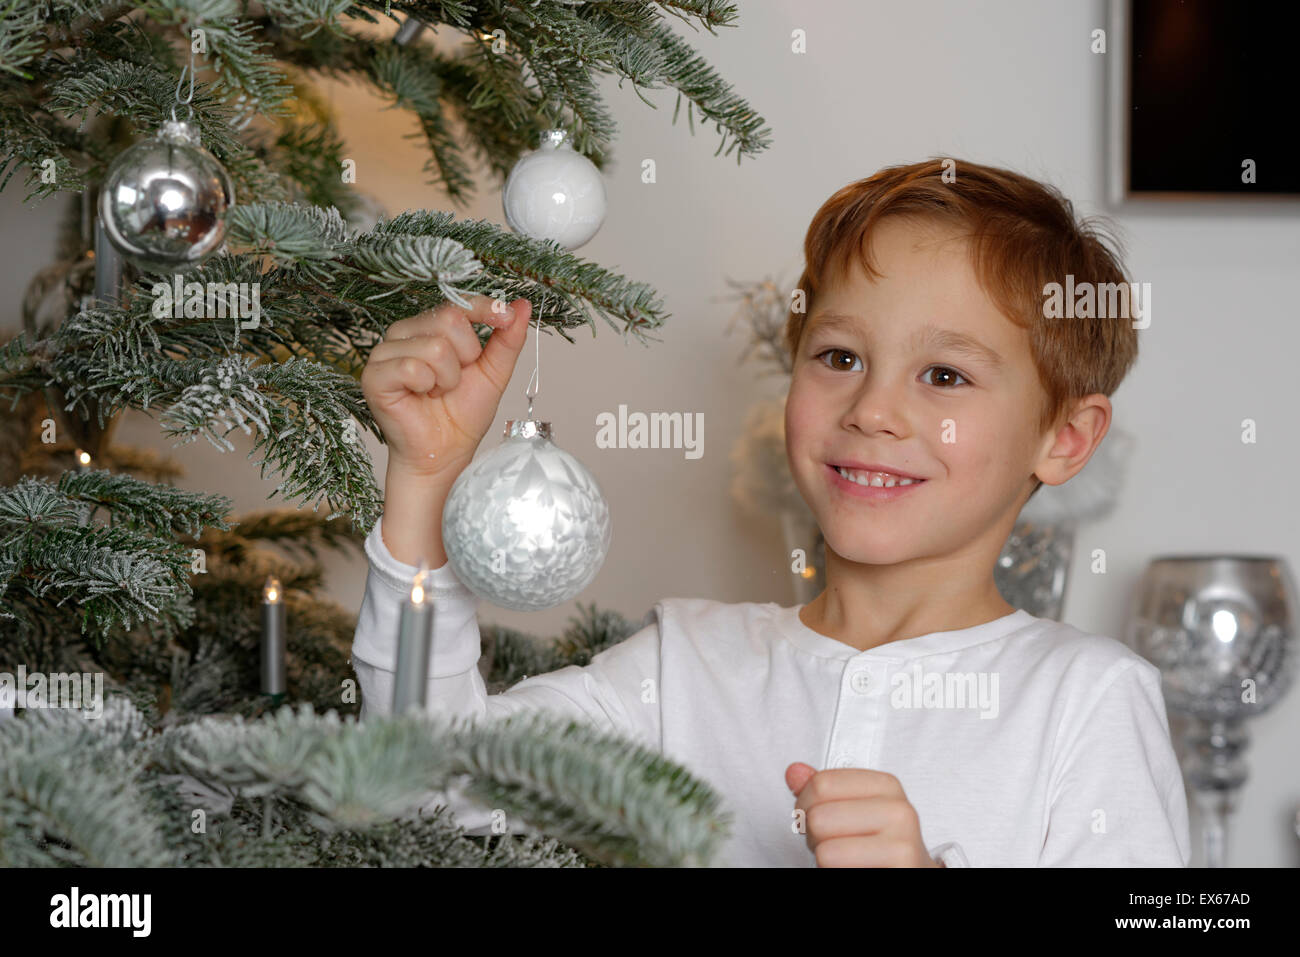 Boy decorating a Christmas tree with baubles, Bavaria, Germany Stock Photo